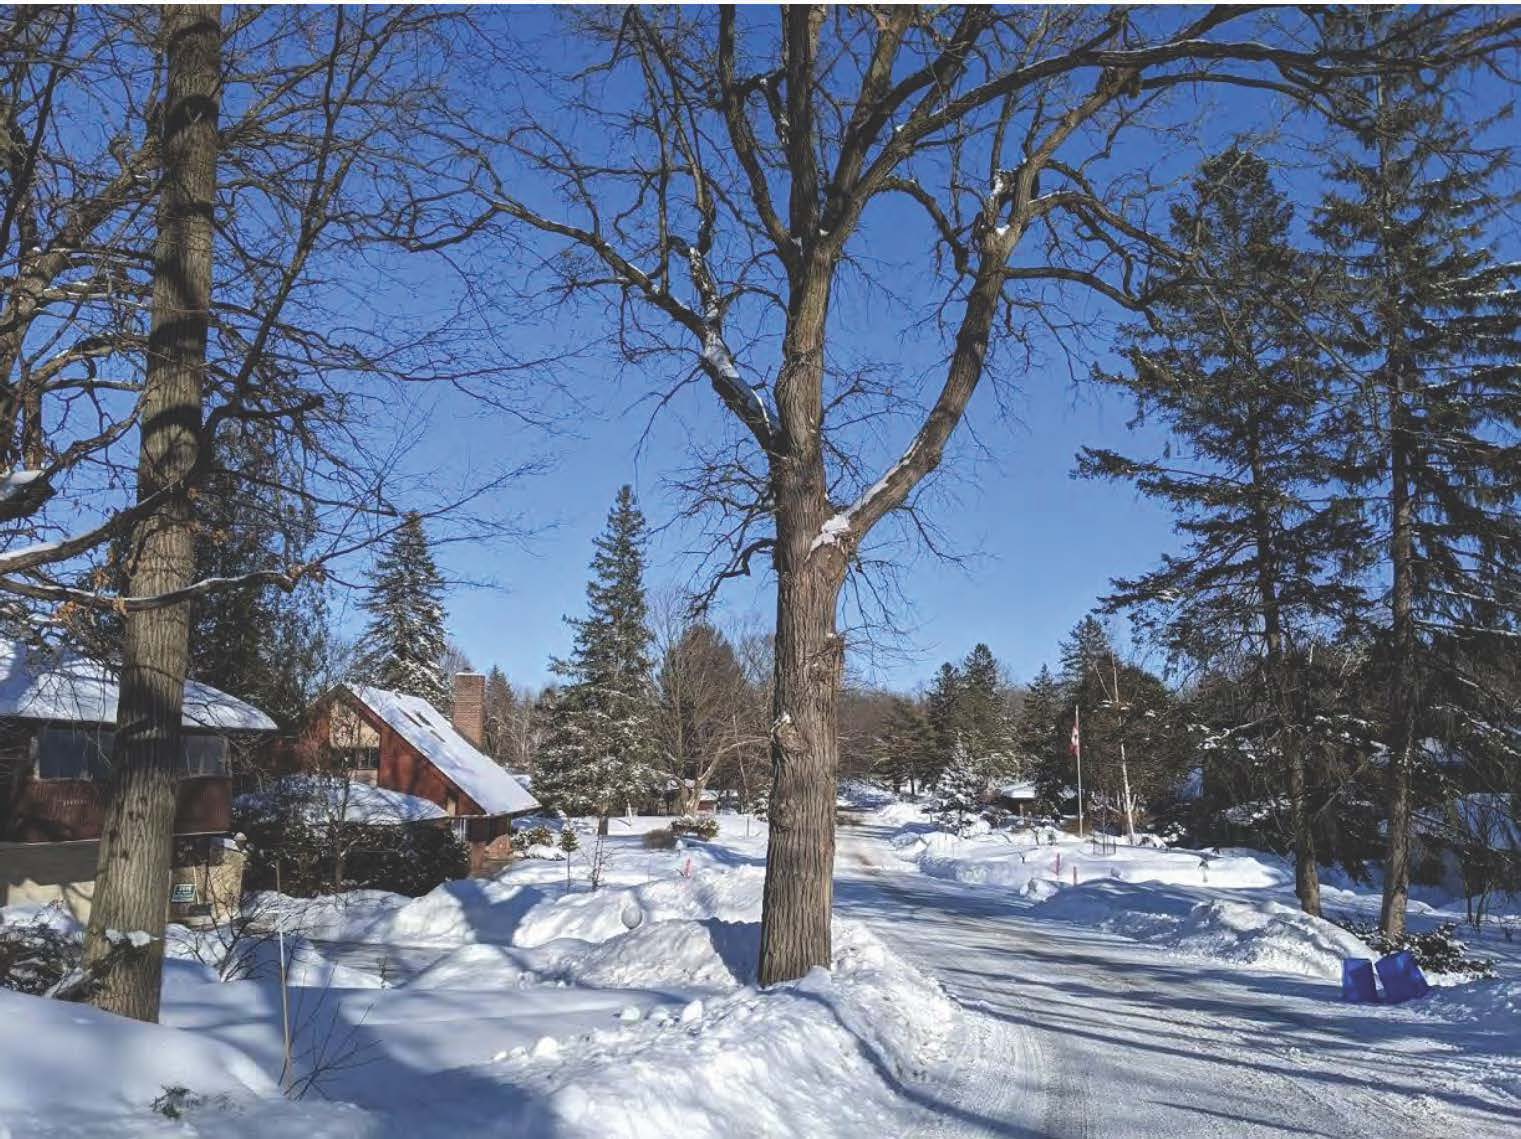 Large tree beside plowed snow covered road, snow covered houses to the left